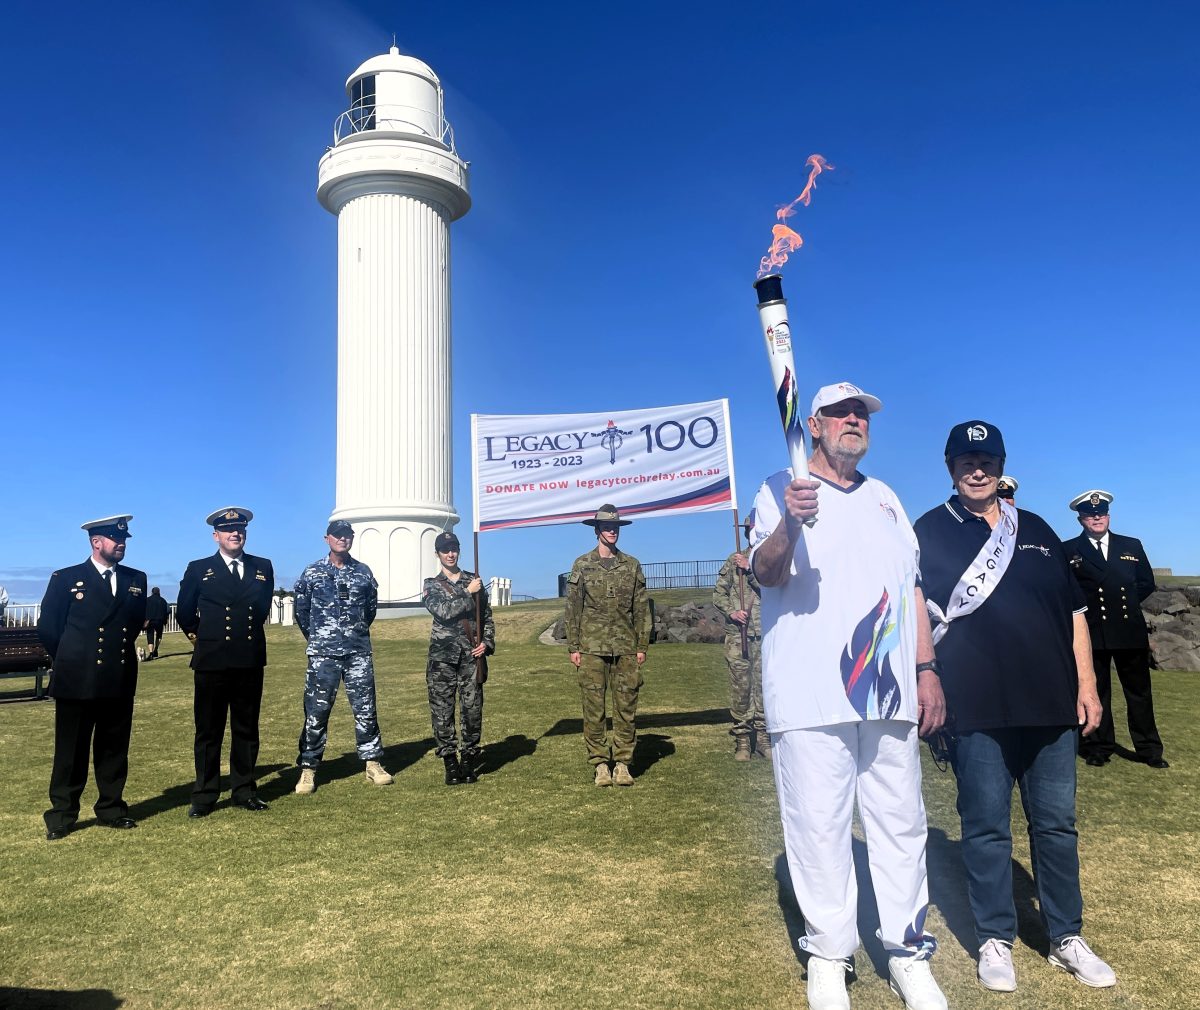 Greg Keir holding torch with servicepeople and Legacy sign behind him at Wollongong Lighthouse.